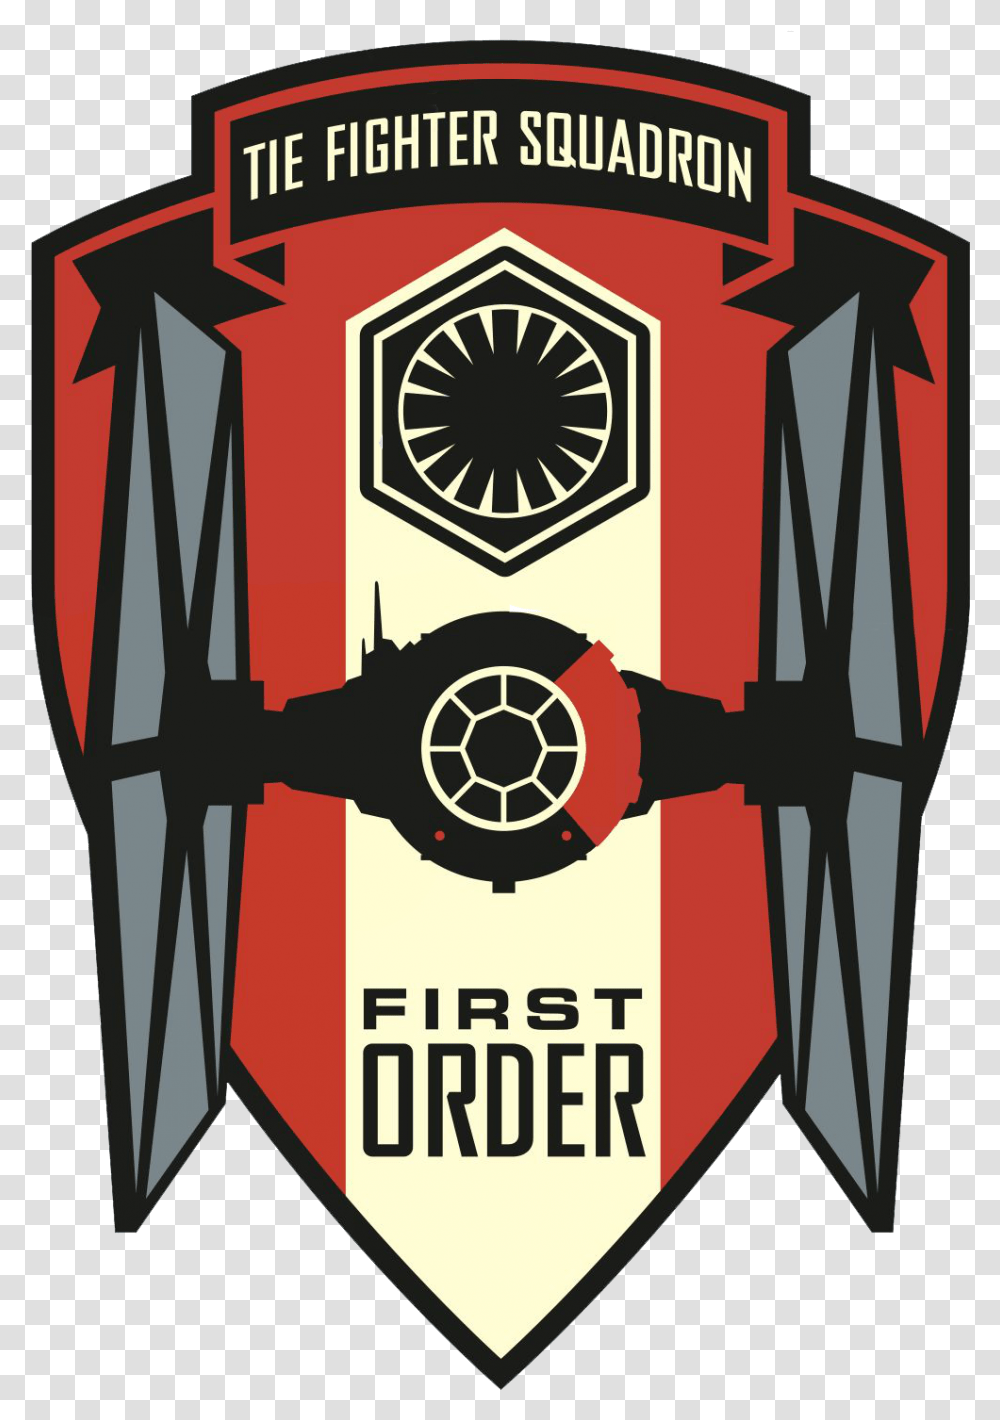 Star Wars The Force Awakens First Order And Resistance Star Wars The Fighter Squadron, Logo, Symbol, Poster, Advertisement Transparent Png